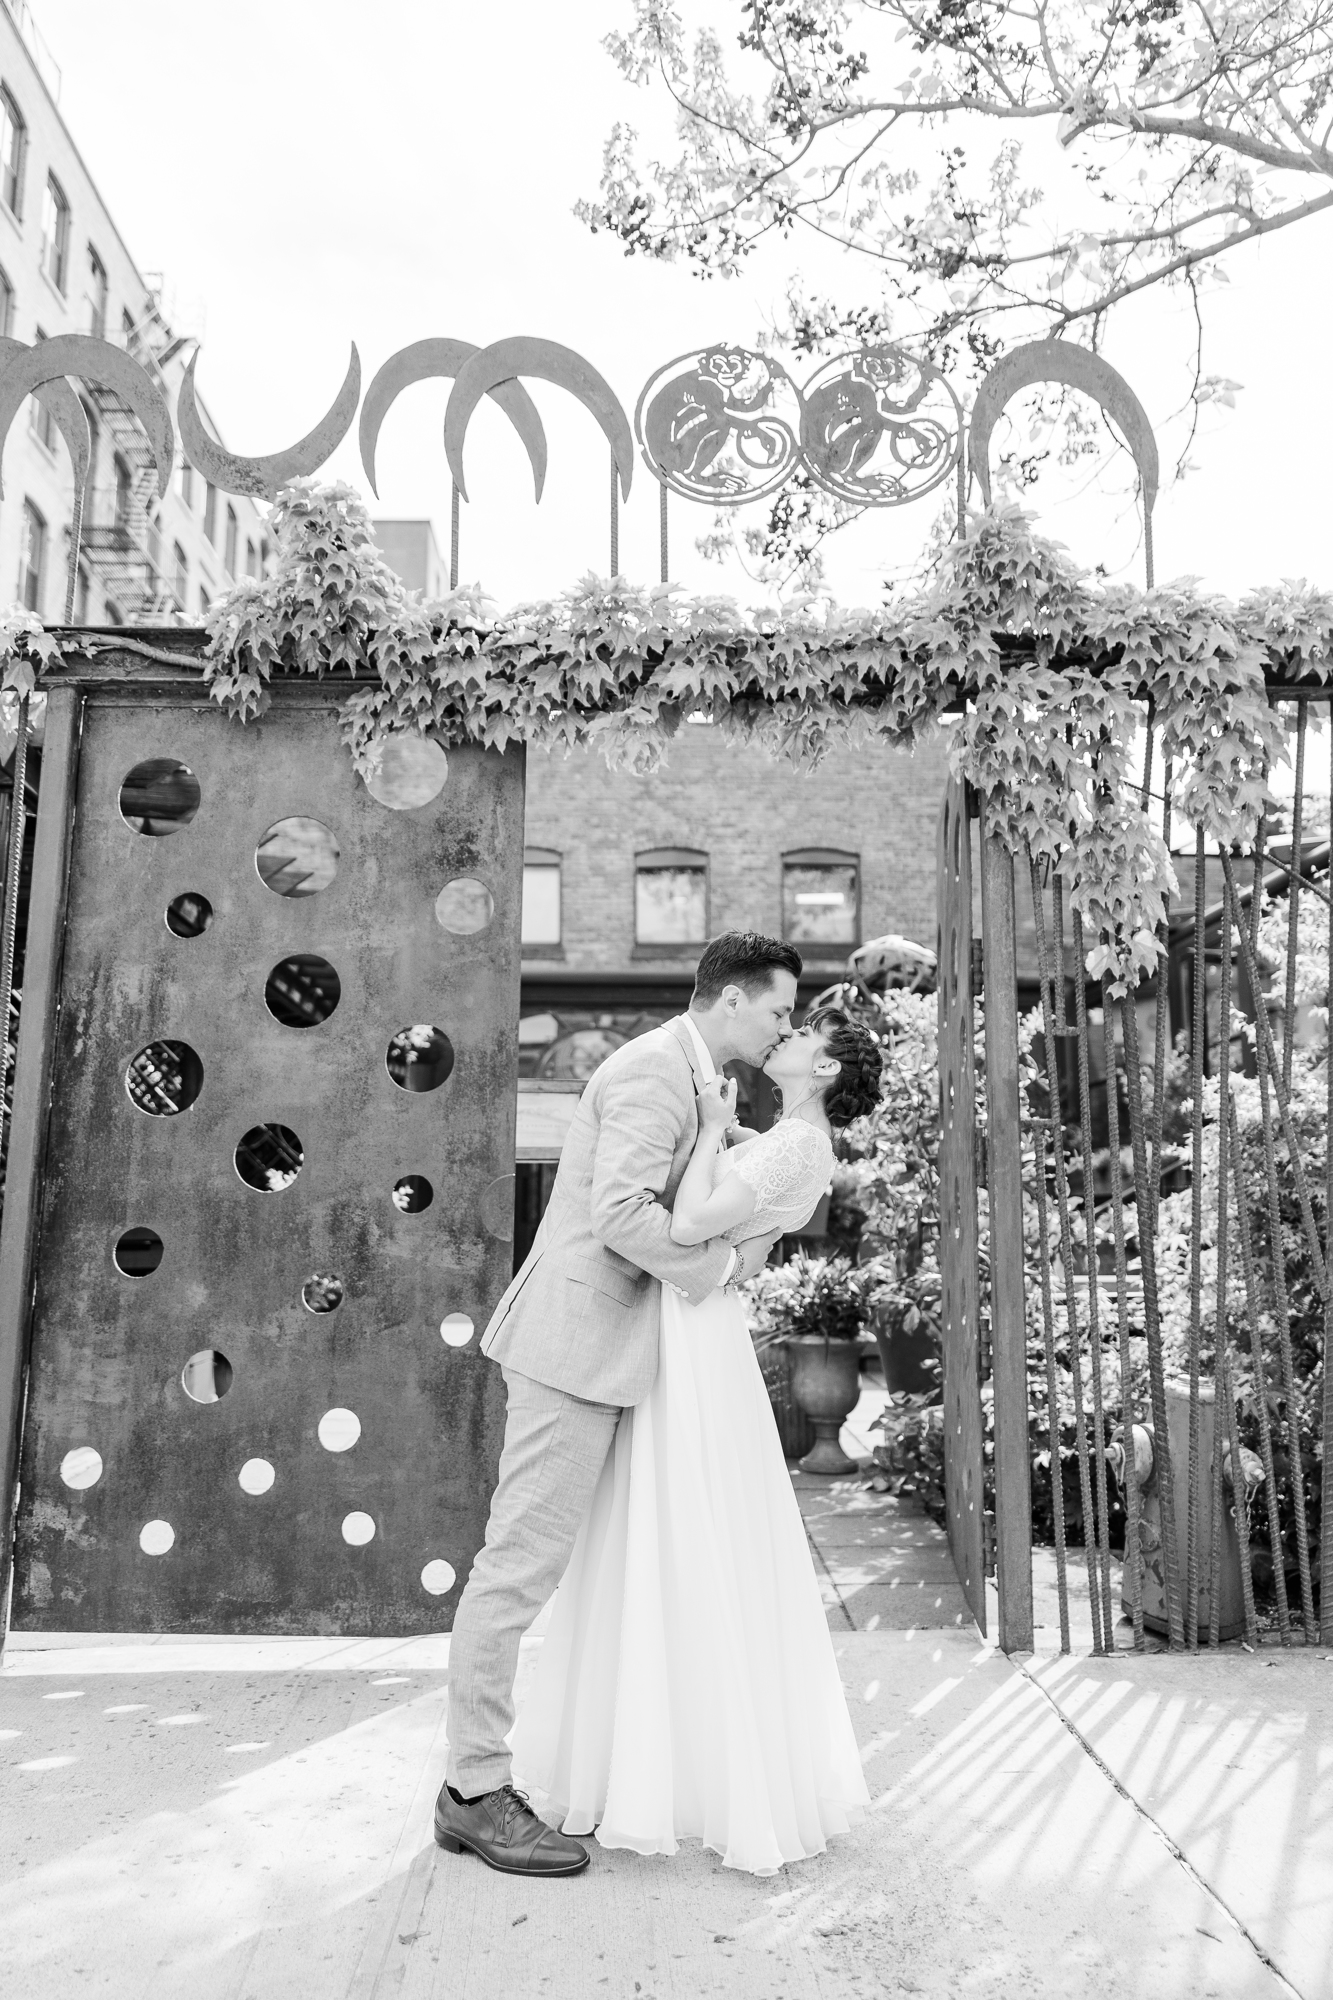 Timeless MyMoon Wedding Photo Gallery in Summertime